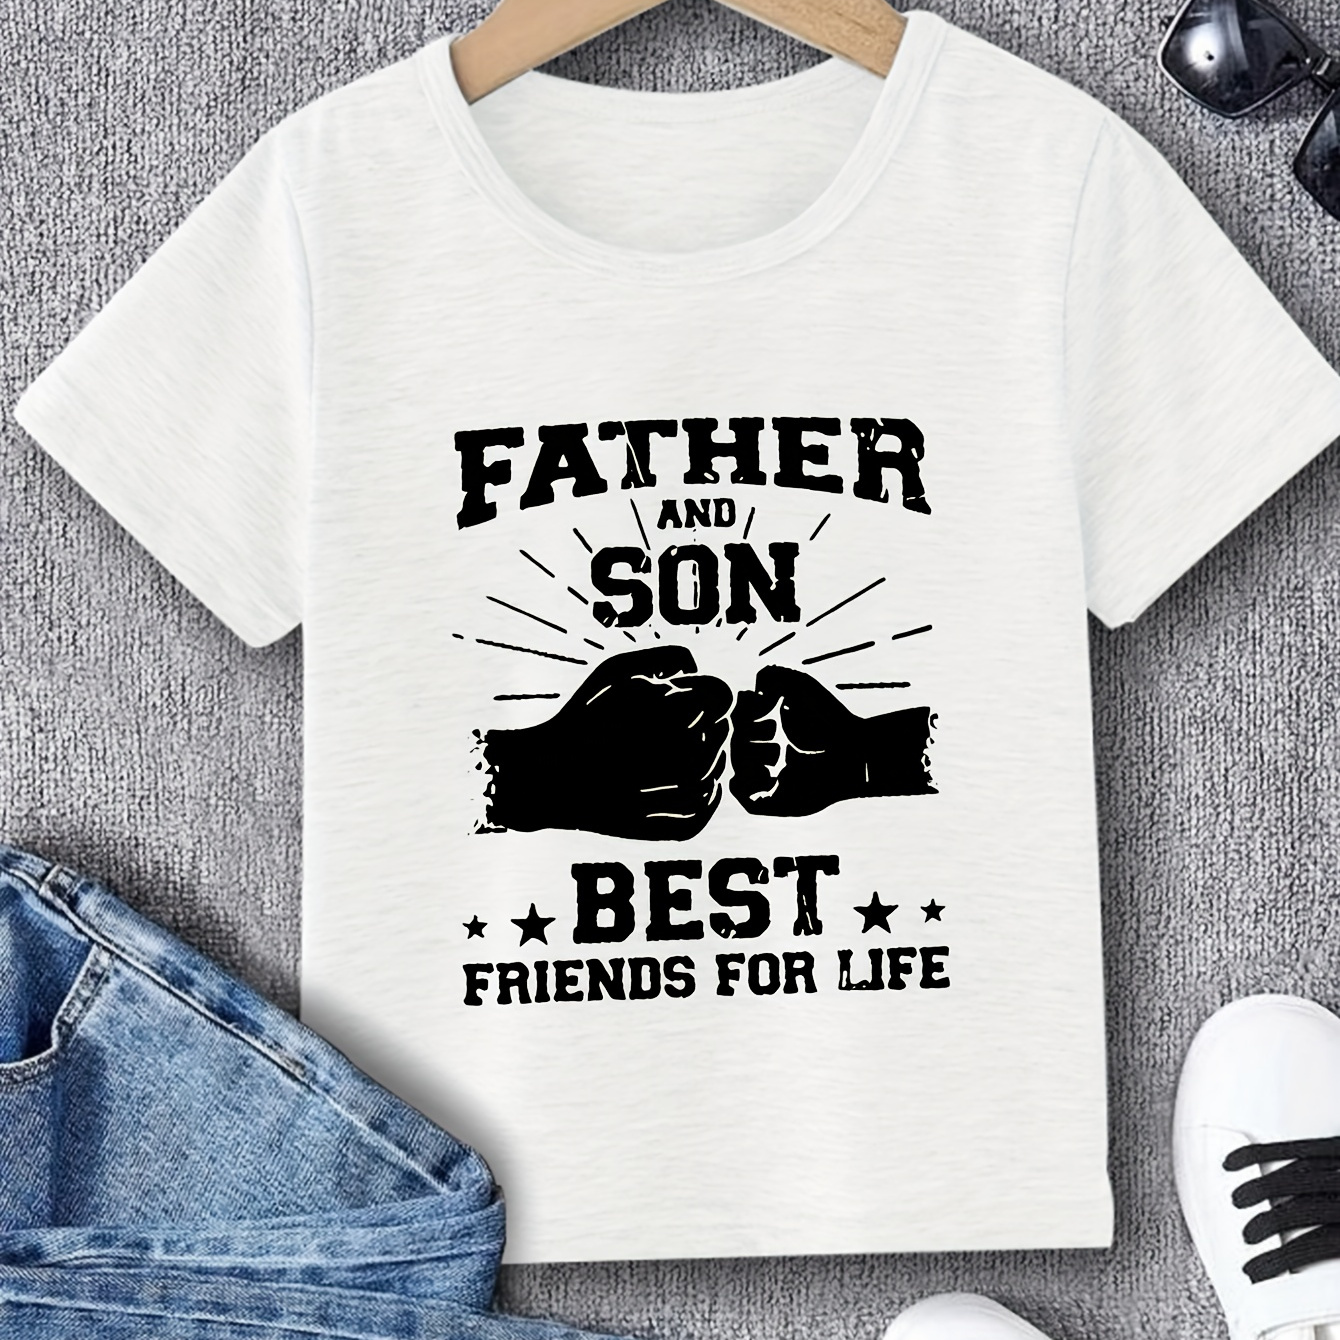 

Father Son Graphic Print Casual Short Sleeve T-shirt For Boys, Comfy Lightweight Versatile Trendy Tee, Boys Summer Outfits Clothes